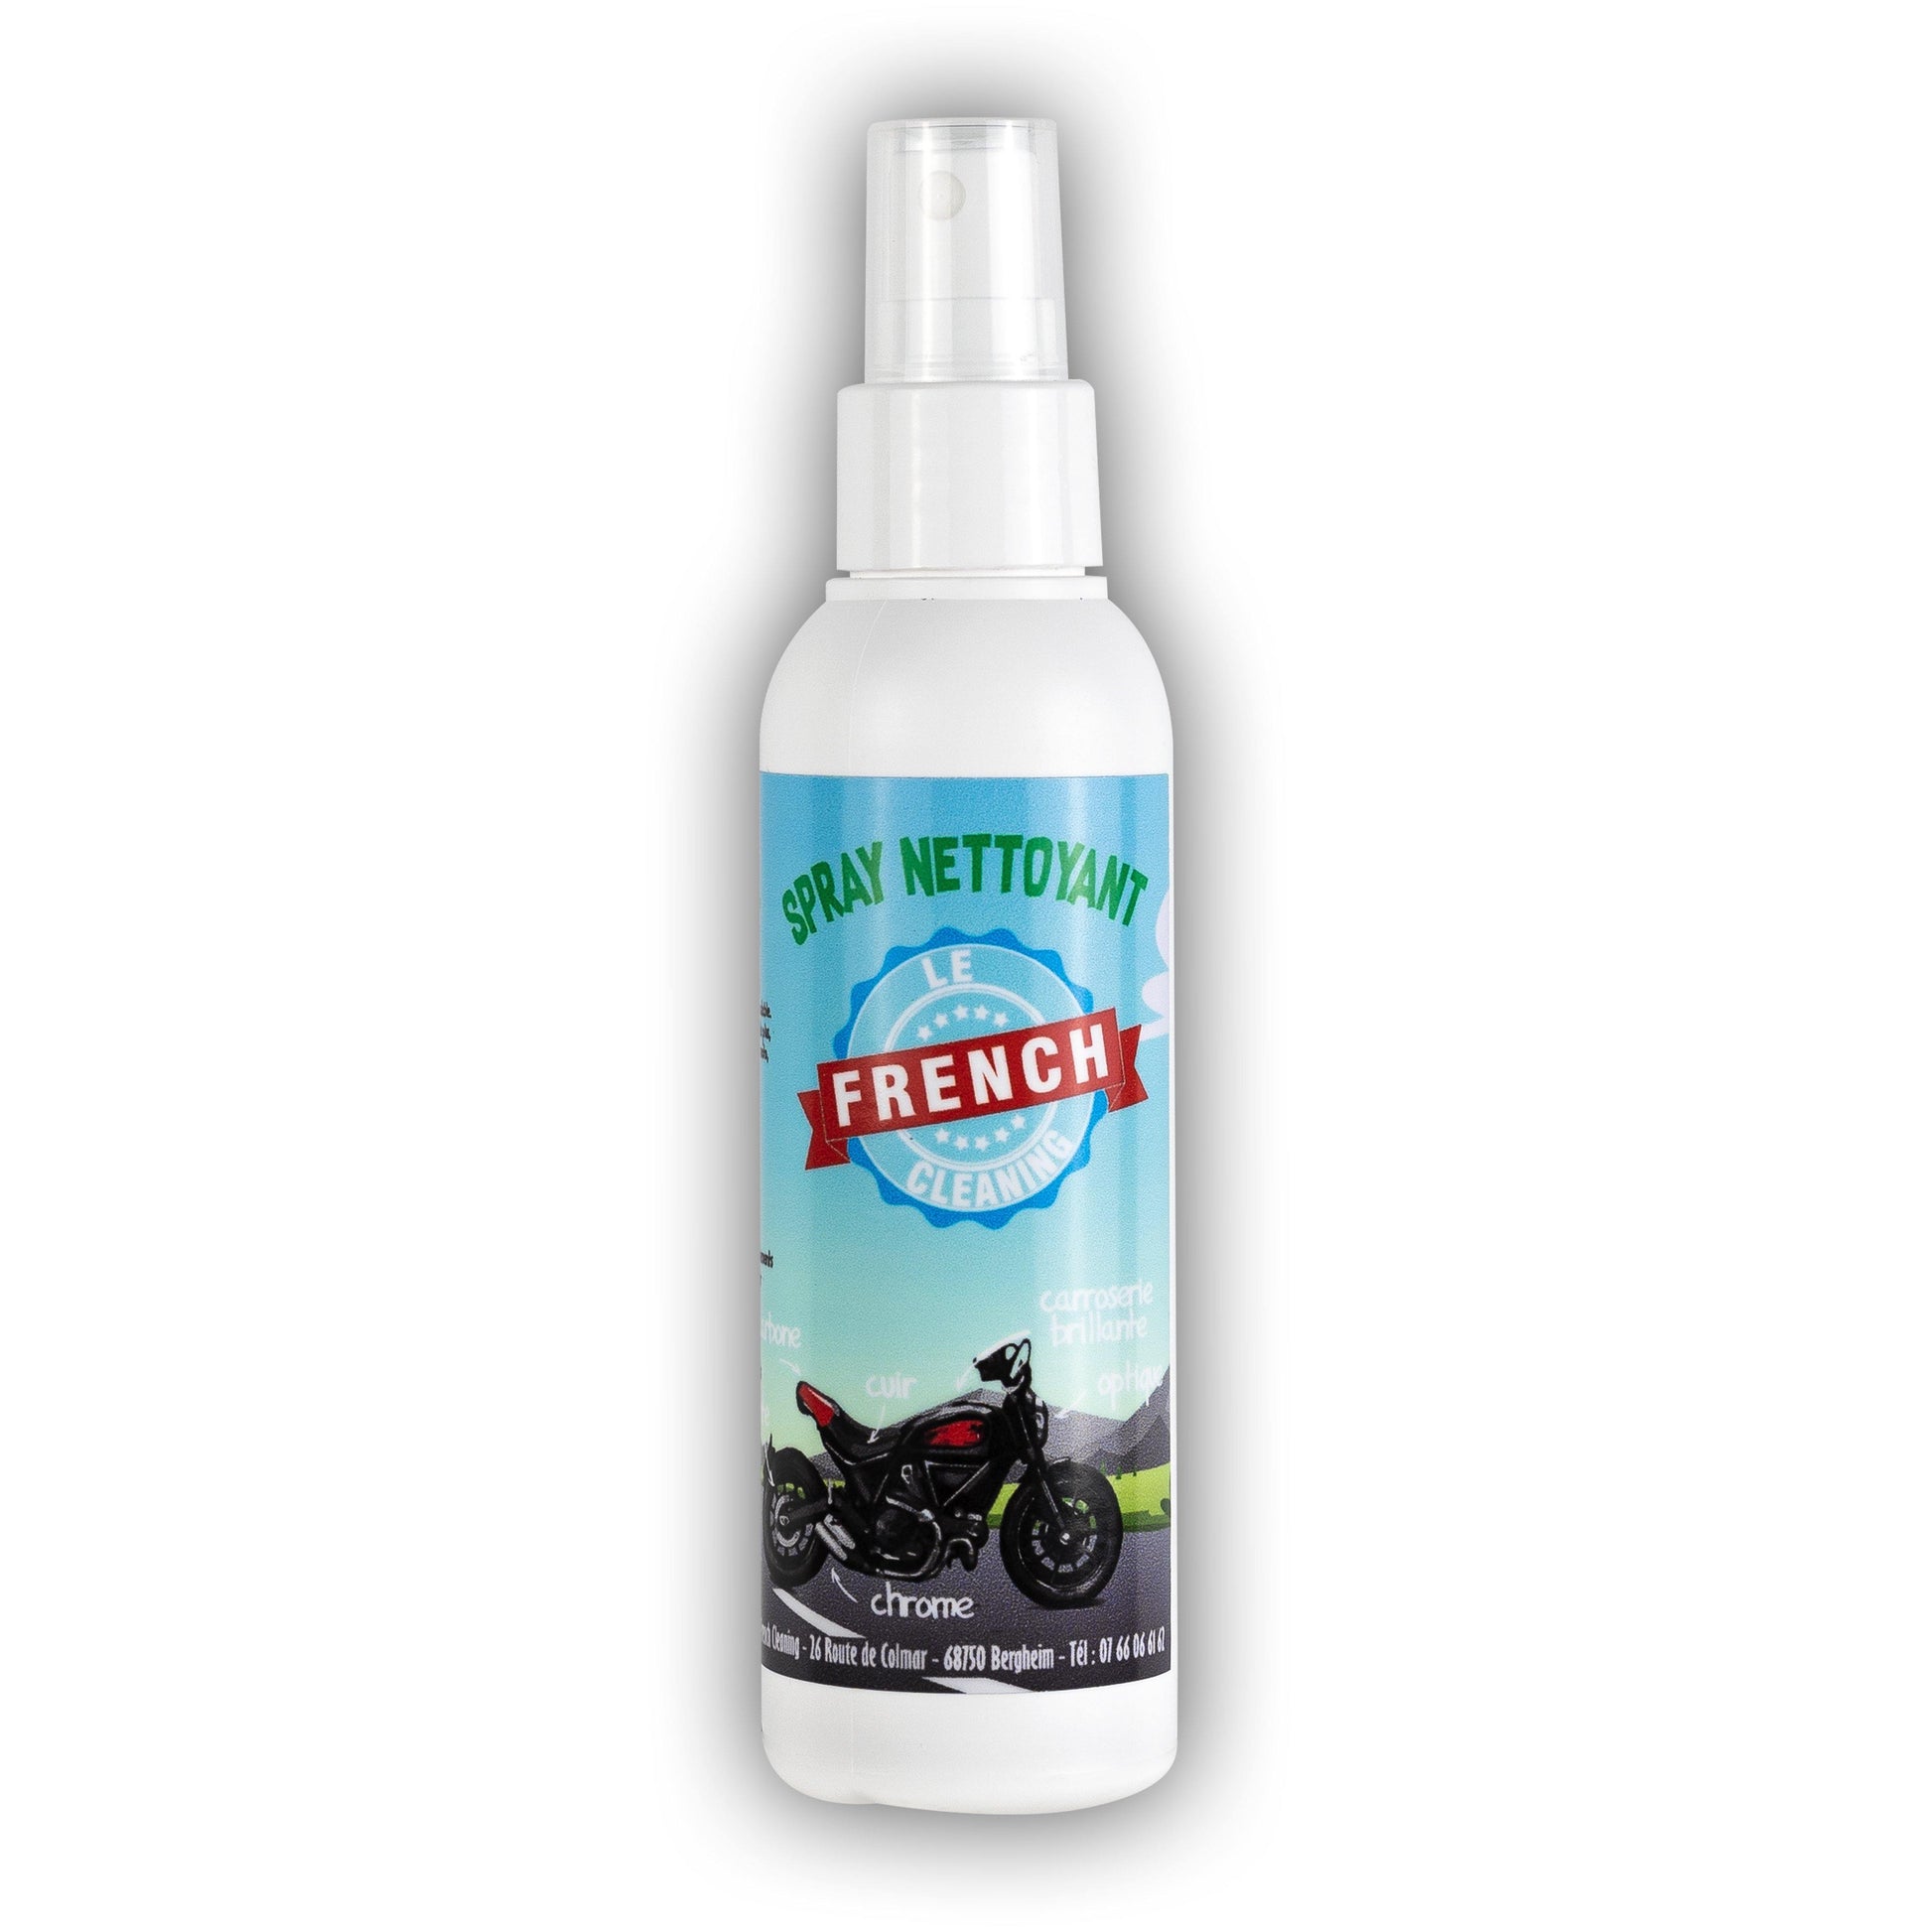 Le French Cleaning  Spray nettoyant moto naturel